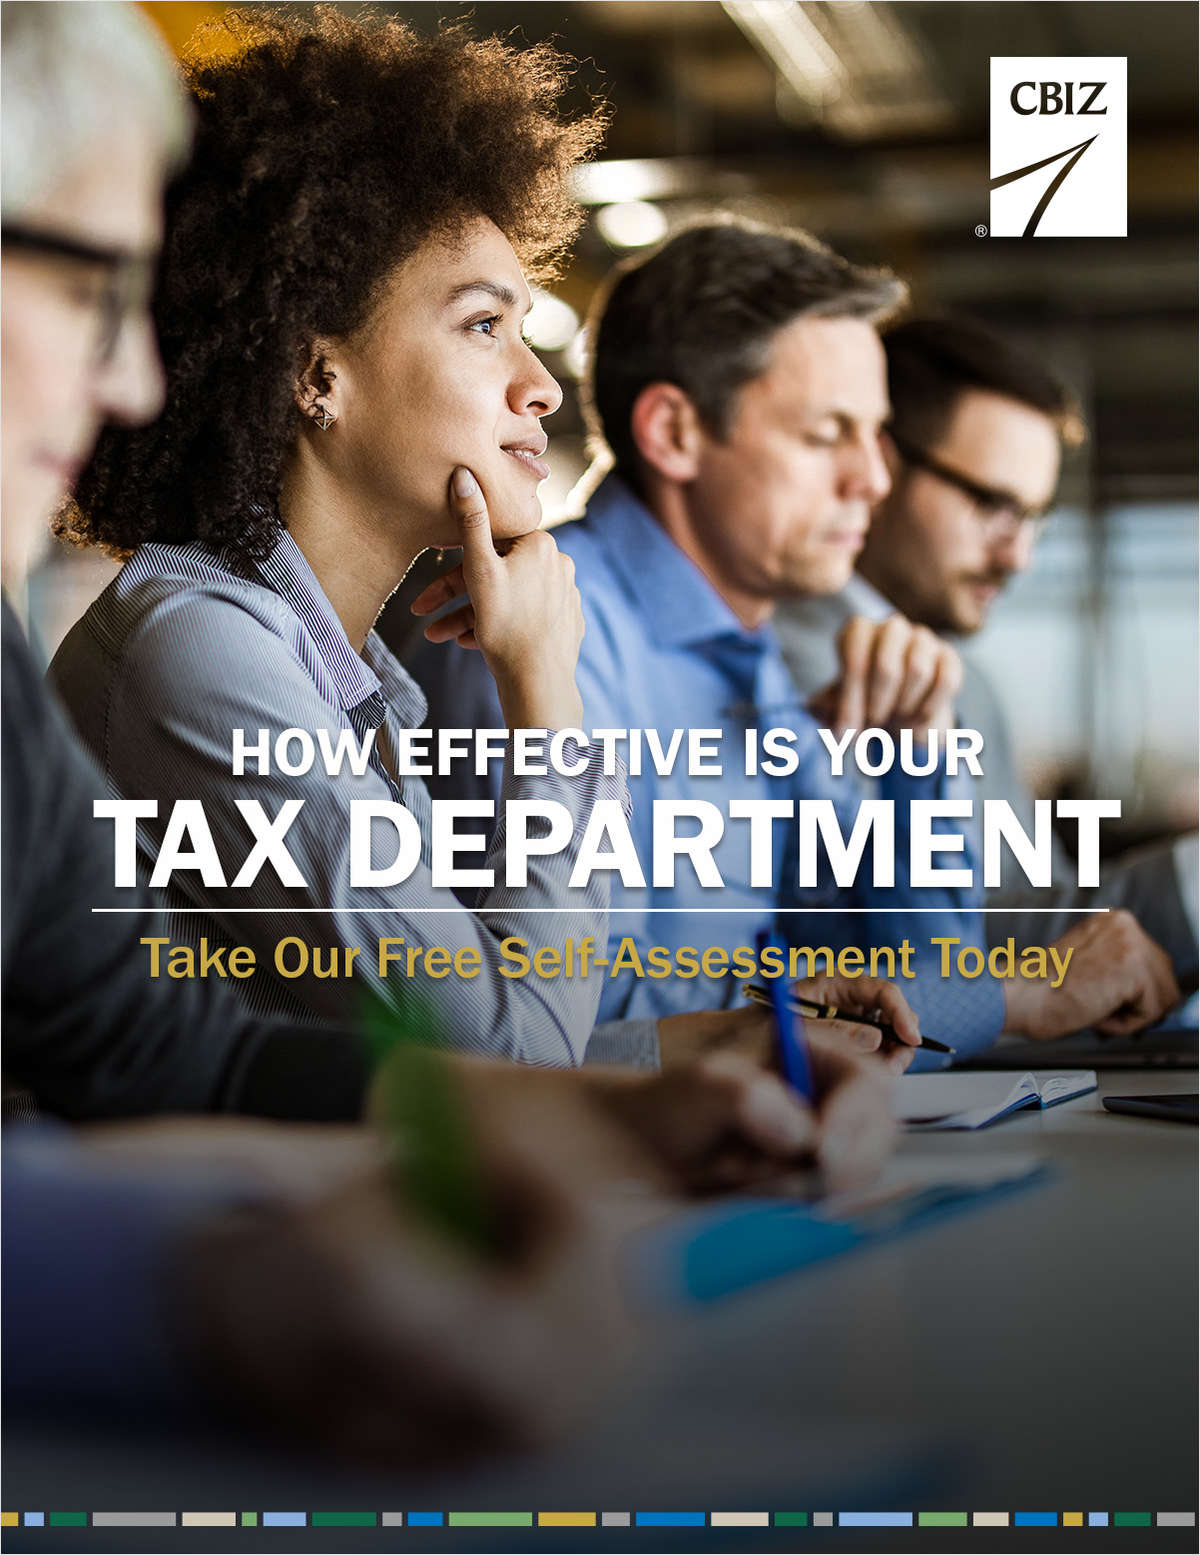 Rate the Effectiveness of Your Tax Department in These 7 Key Areas